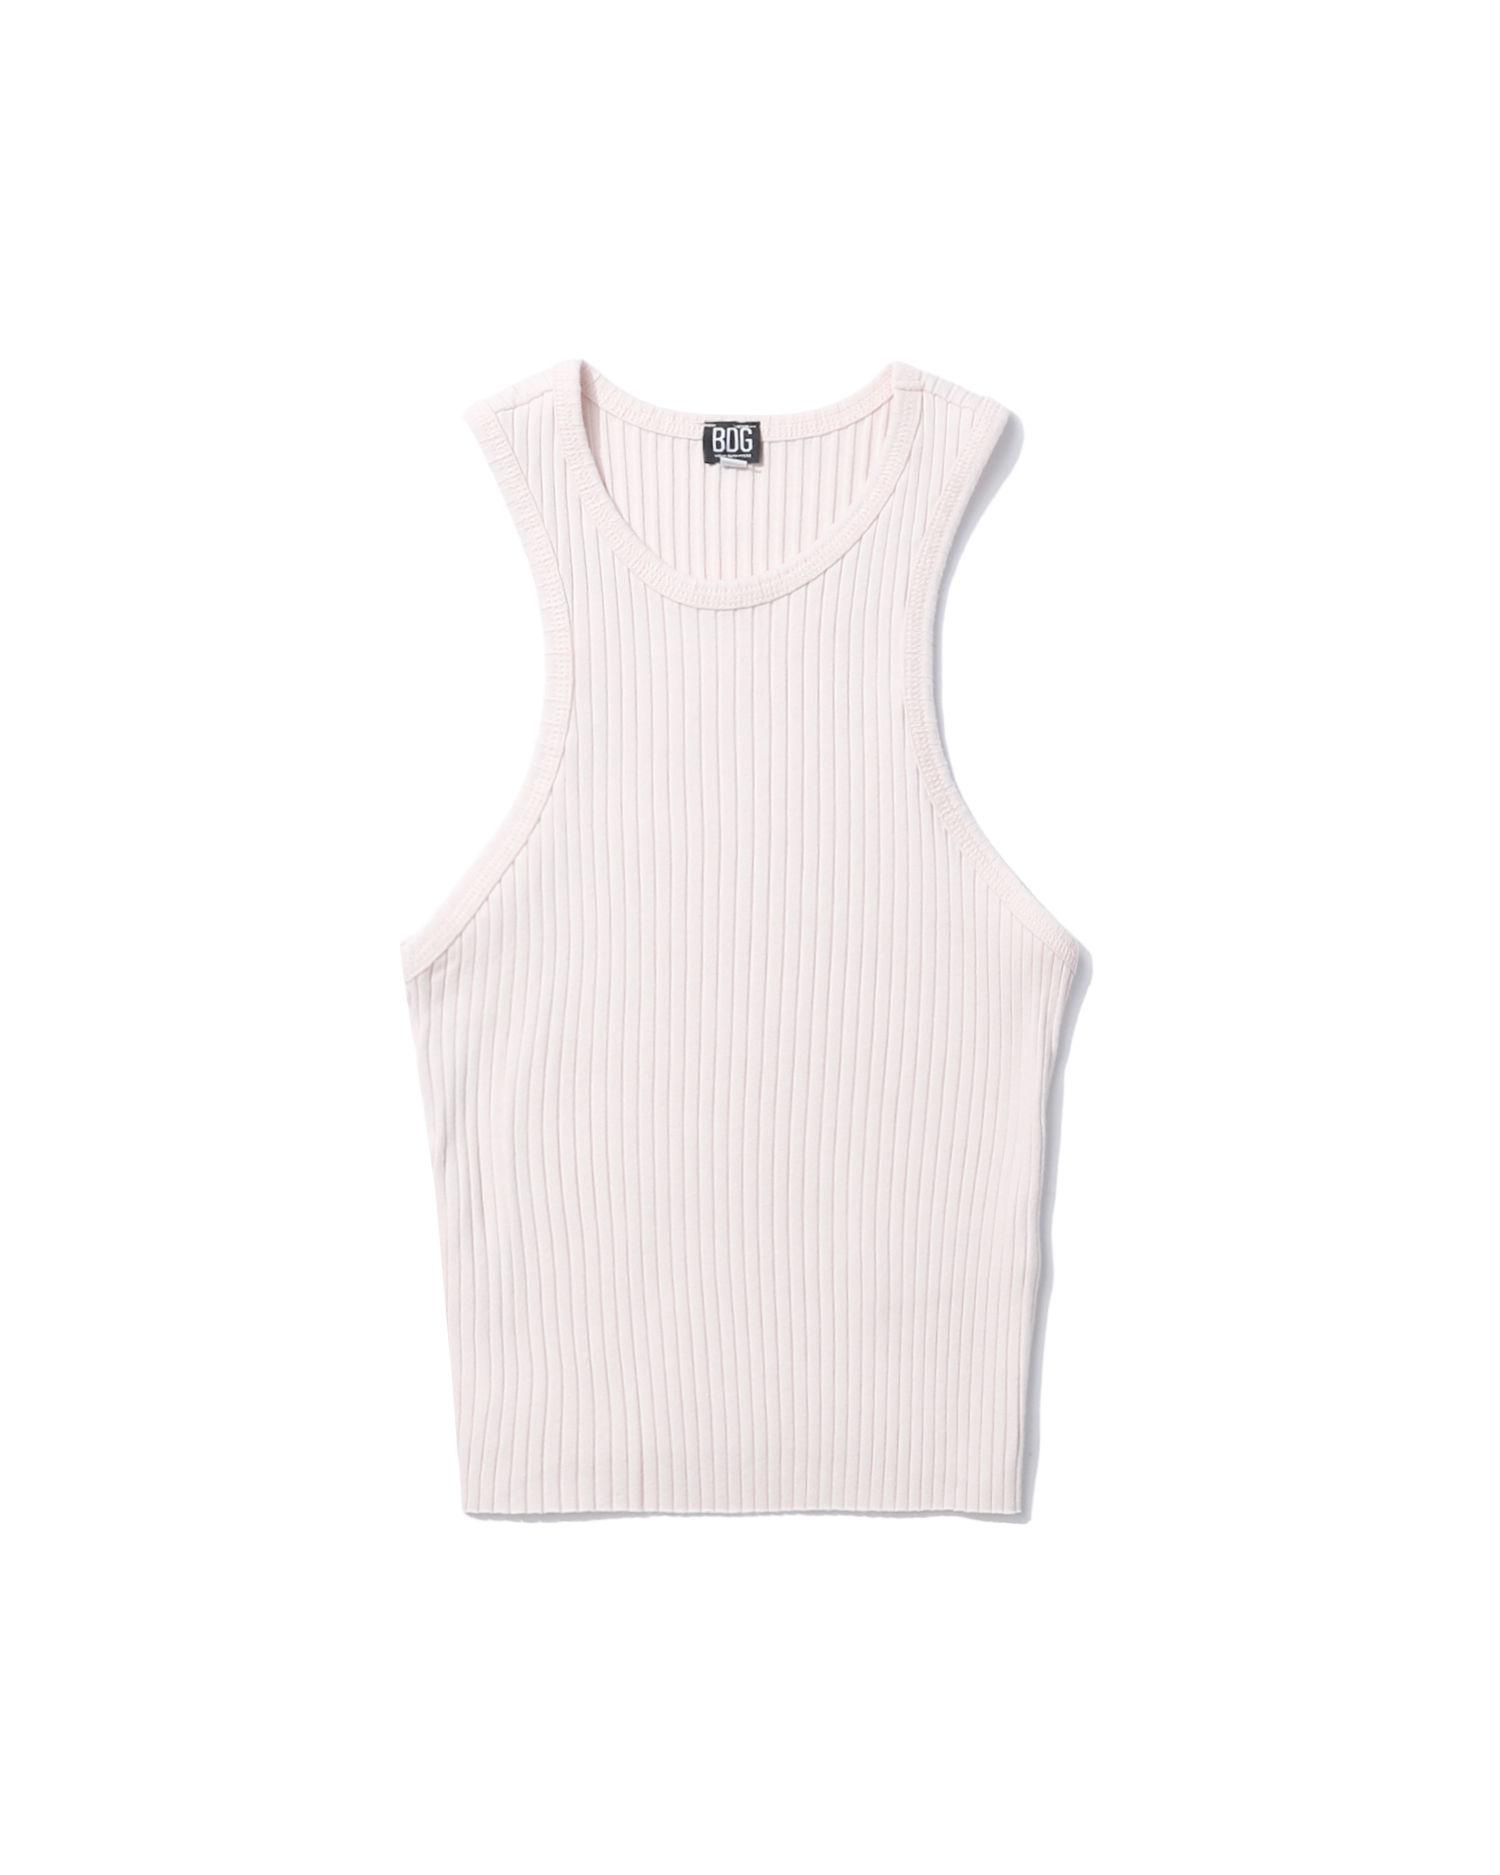 Ribbed tank top by BDG